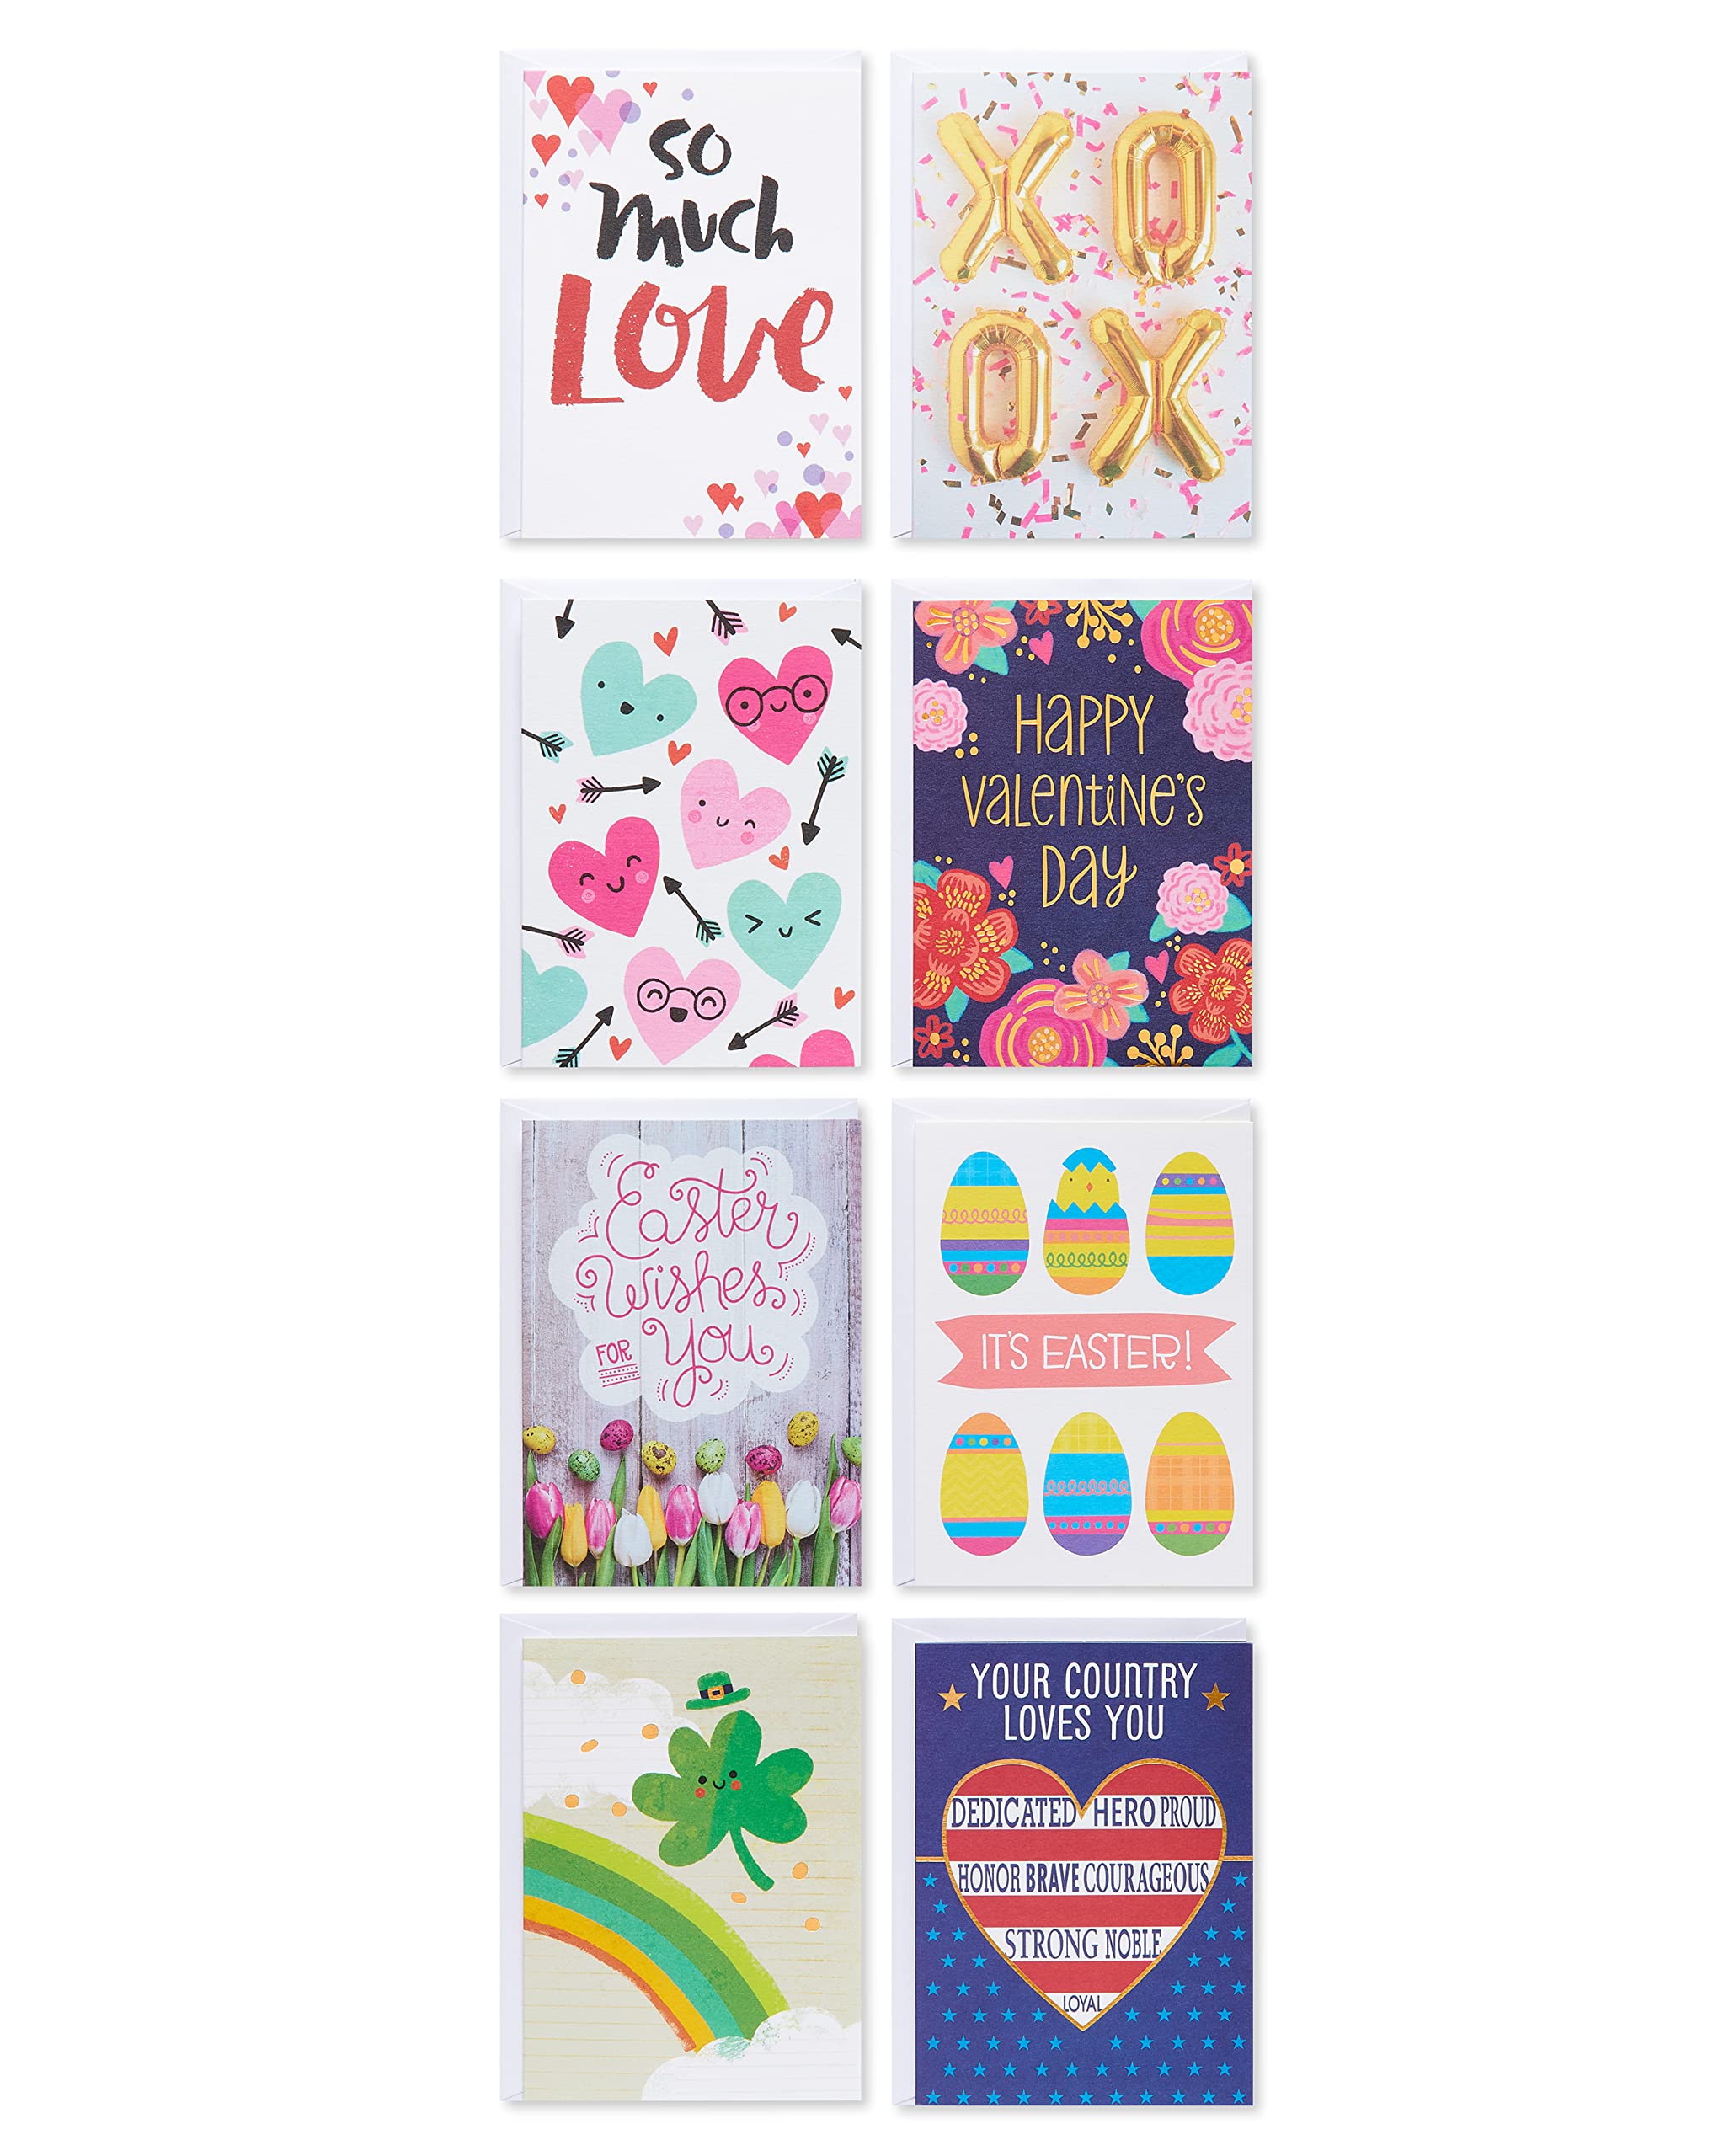 American Greetings Deluxe Holiday Card Assortment, Christmas, Halloween, Thanksgiving, Mother's Day (33-Count)